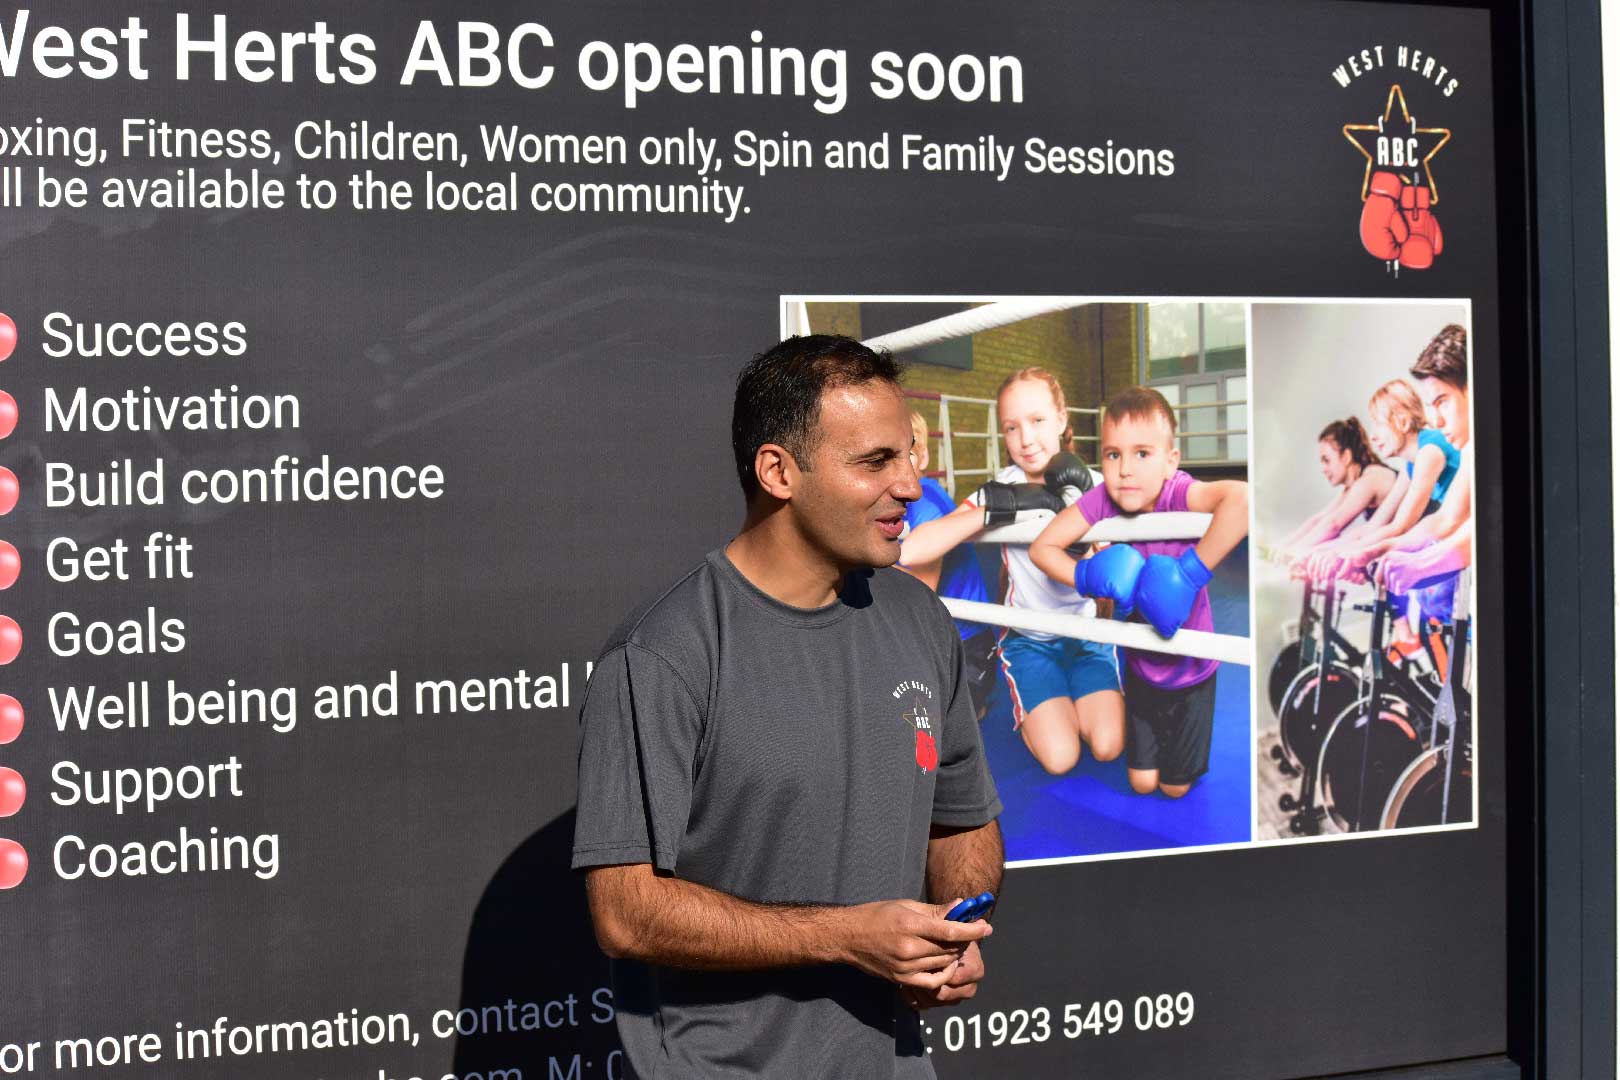 Amateur Boxing to bring social change to young people in Watford